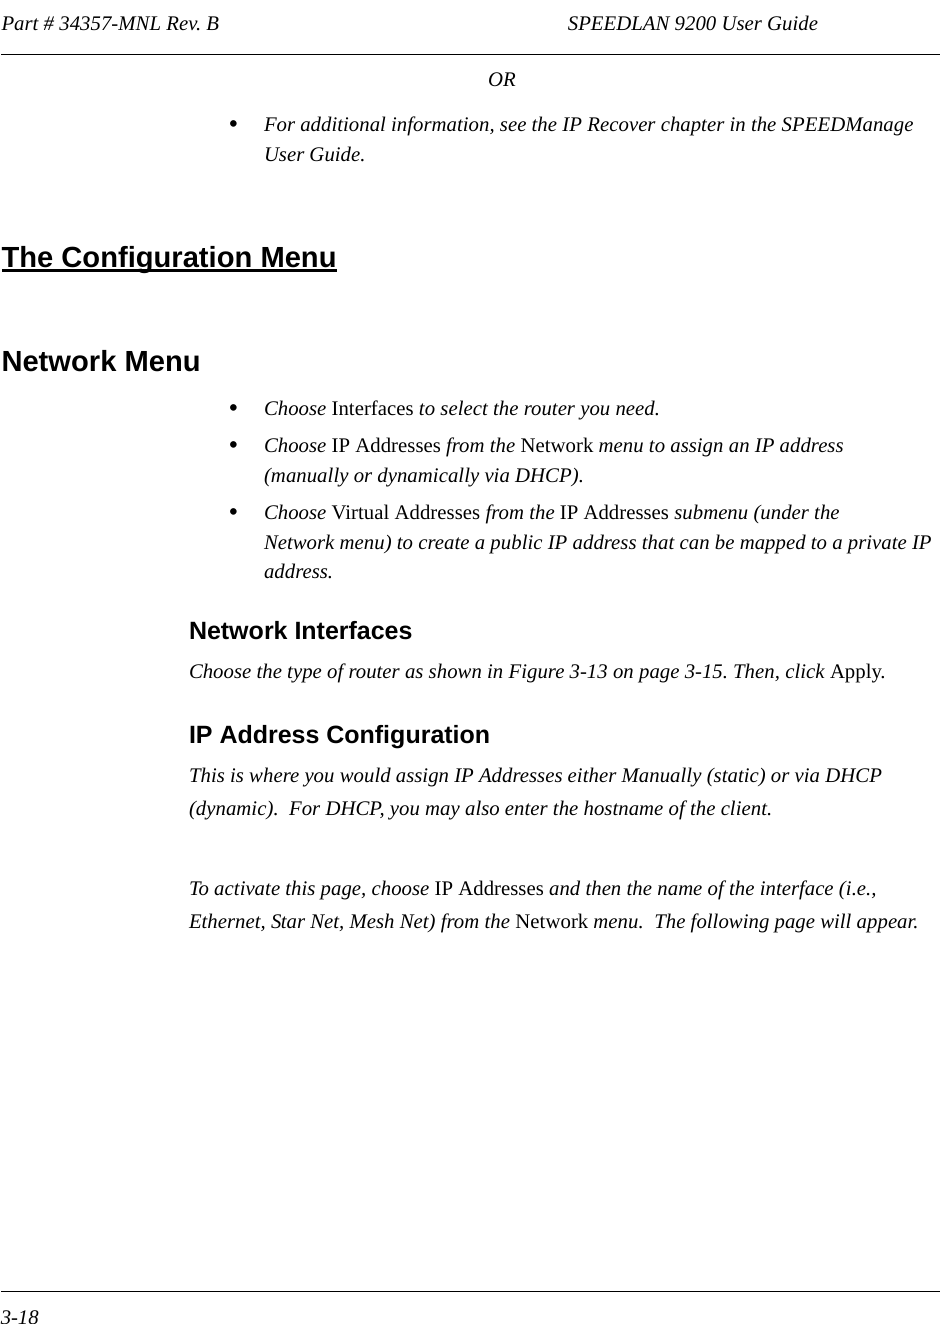 Part # 34357-MNL Rev. B                                                                   SPEEDLAN 9200 User Guide 3-18OR•For additional information, see the IP Recover chapter in the SPEEDManage User Guide. The Configuration MenuNetwork Menu•Choose Interfaces to select the router you need.•Choose IP Addresses from the Network menu to assign an IP address (manually or dynamically via DHCP).•Choose Virtual Addresses from the IP Addresses submenu (under the Network menu) to create a public IP address that can be mapped to a private IP address.  Network InterfacesChoose the type of router as shown in Figure 3-13 on page 3-15. Then, click Apply.IP Address ConfigurationThis is where you would assign IP Addresses either Manually (static) or via DHCP (dynamic).  For DHCP, you may also enter the hostname of the client.  To activate this page, choose IP Addresses and then the name of the interface (i.e., Ethernet, Star Net, Mesh Net) from the Network menu.  The following page will appear.